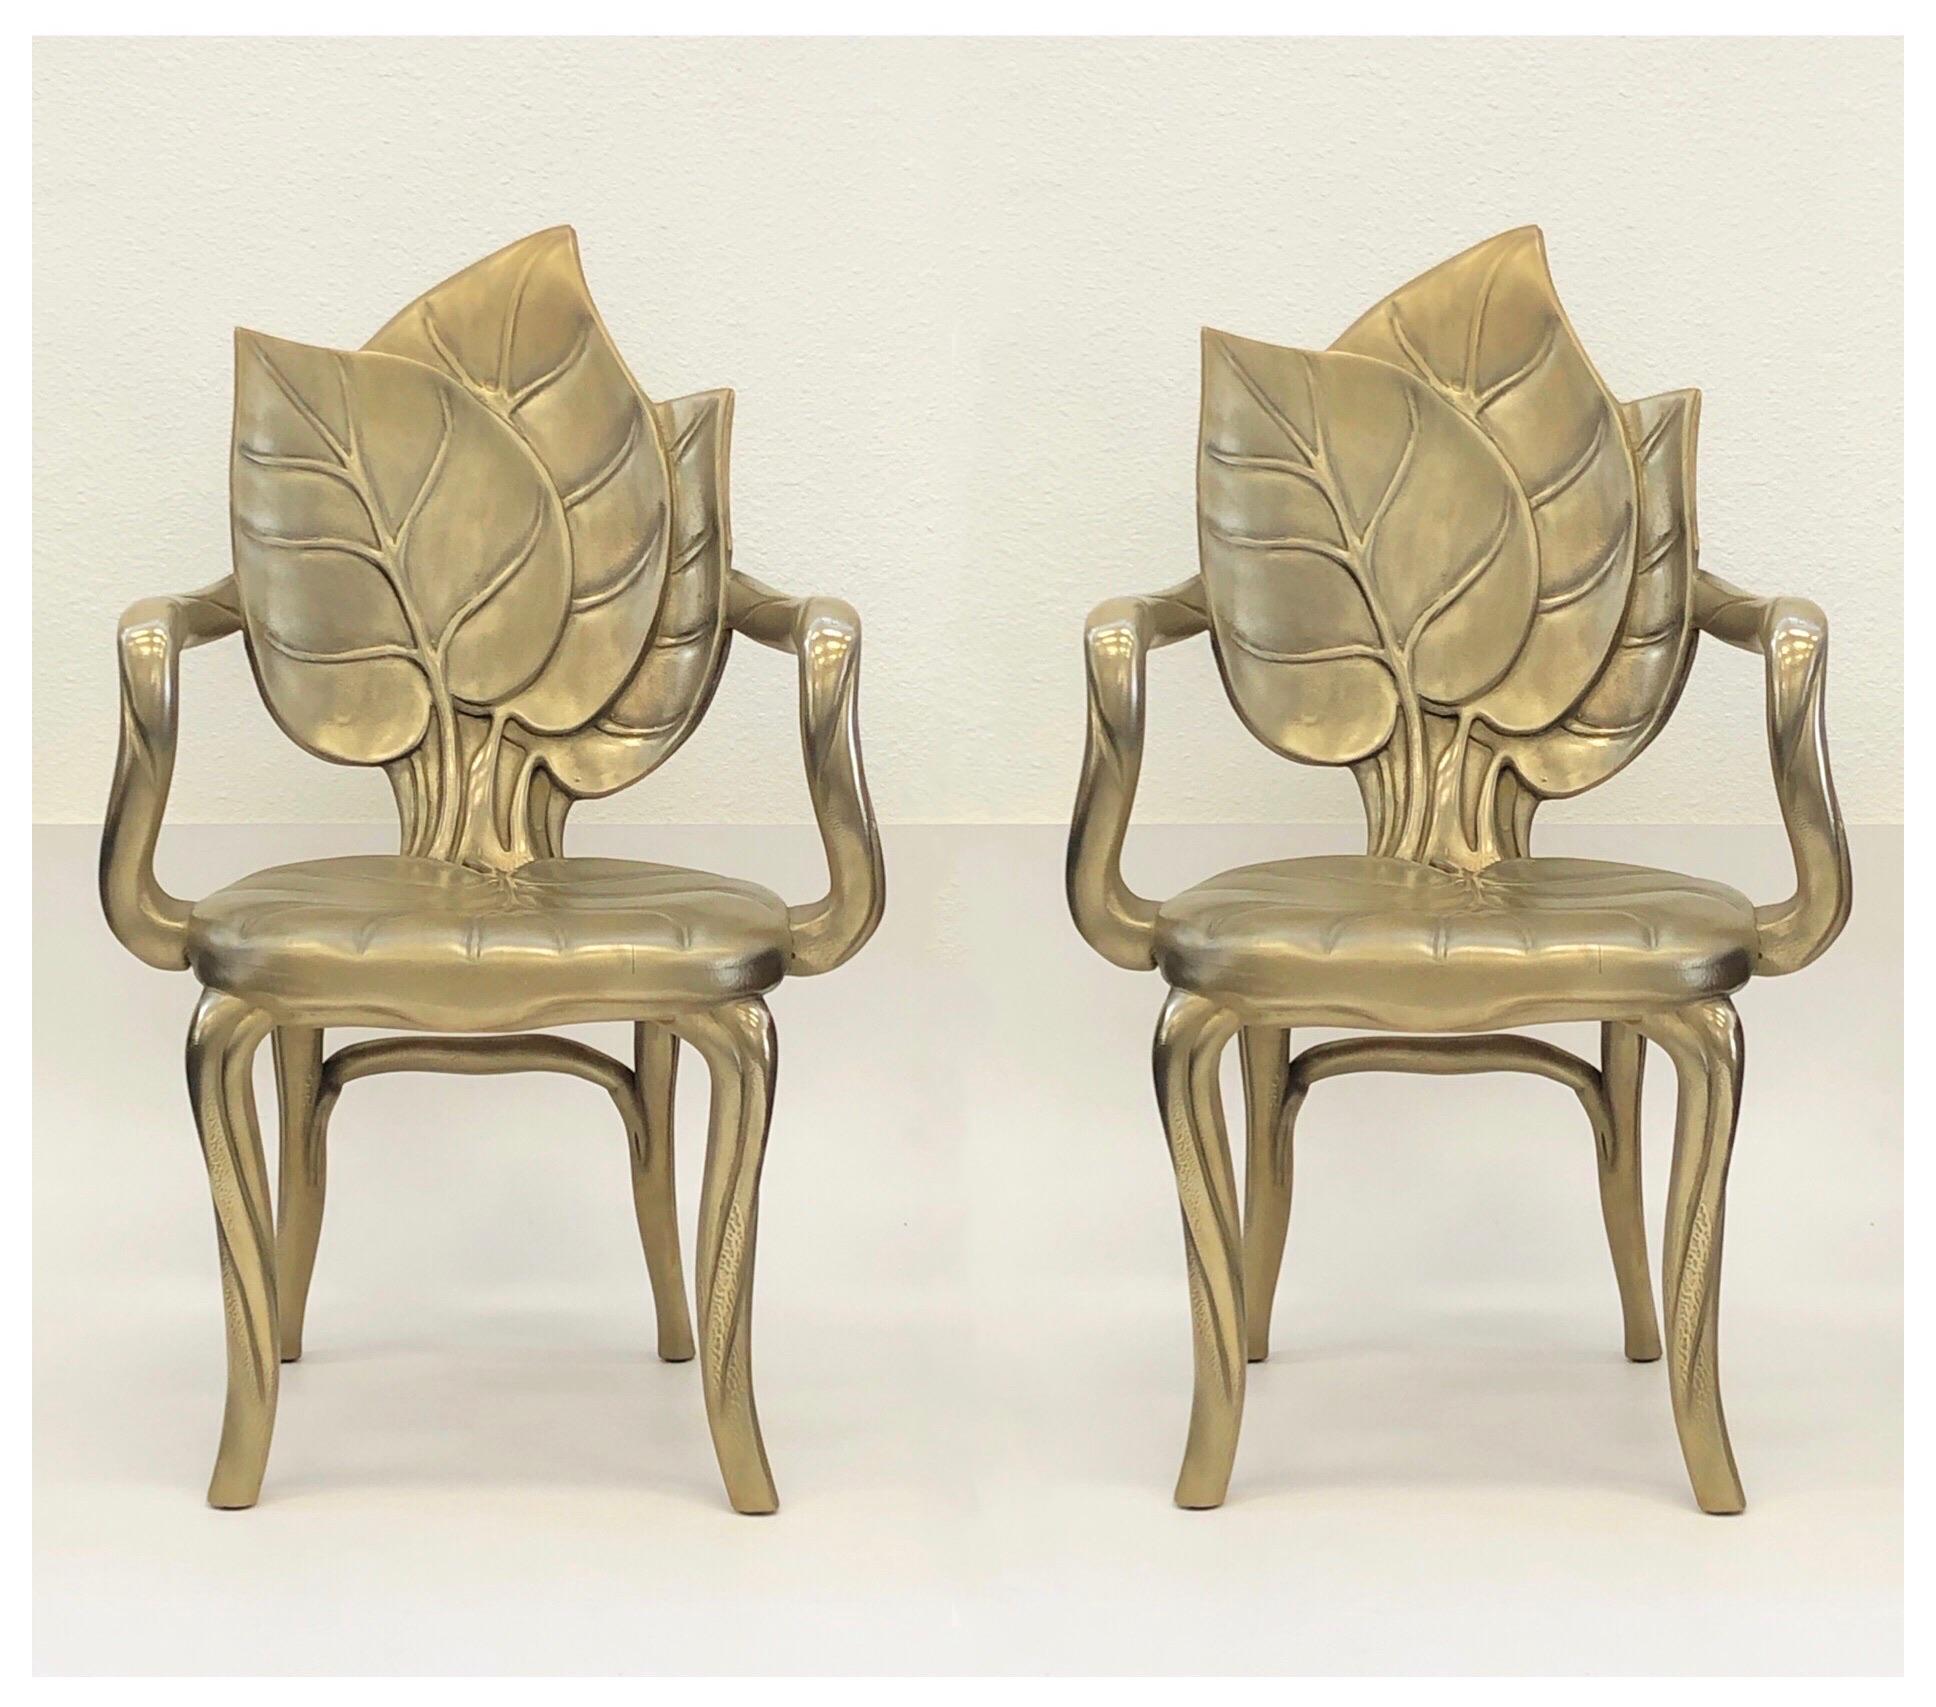 A pair of spectacular hand carved wooden leaf armchairs design by Bartolozzi and Maioli in the 1970s.
The chairs are sprayed powder brass with only some areas polished.
Measurements: 22.25” wide 21” deep 25.25” arm height 17” seat height 36.5”